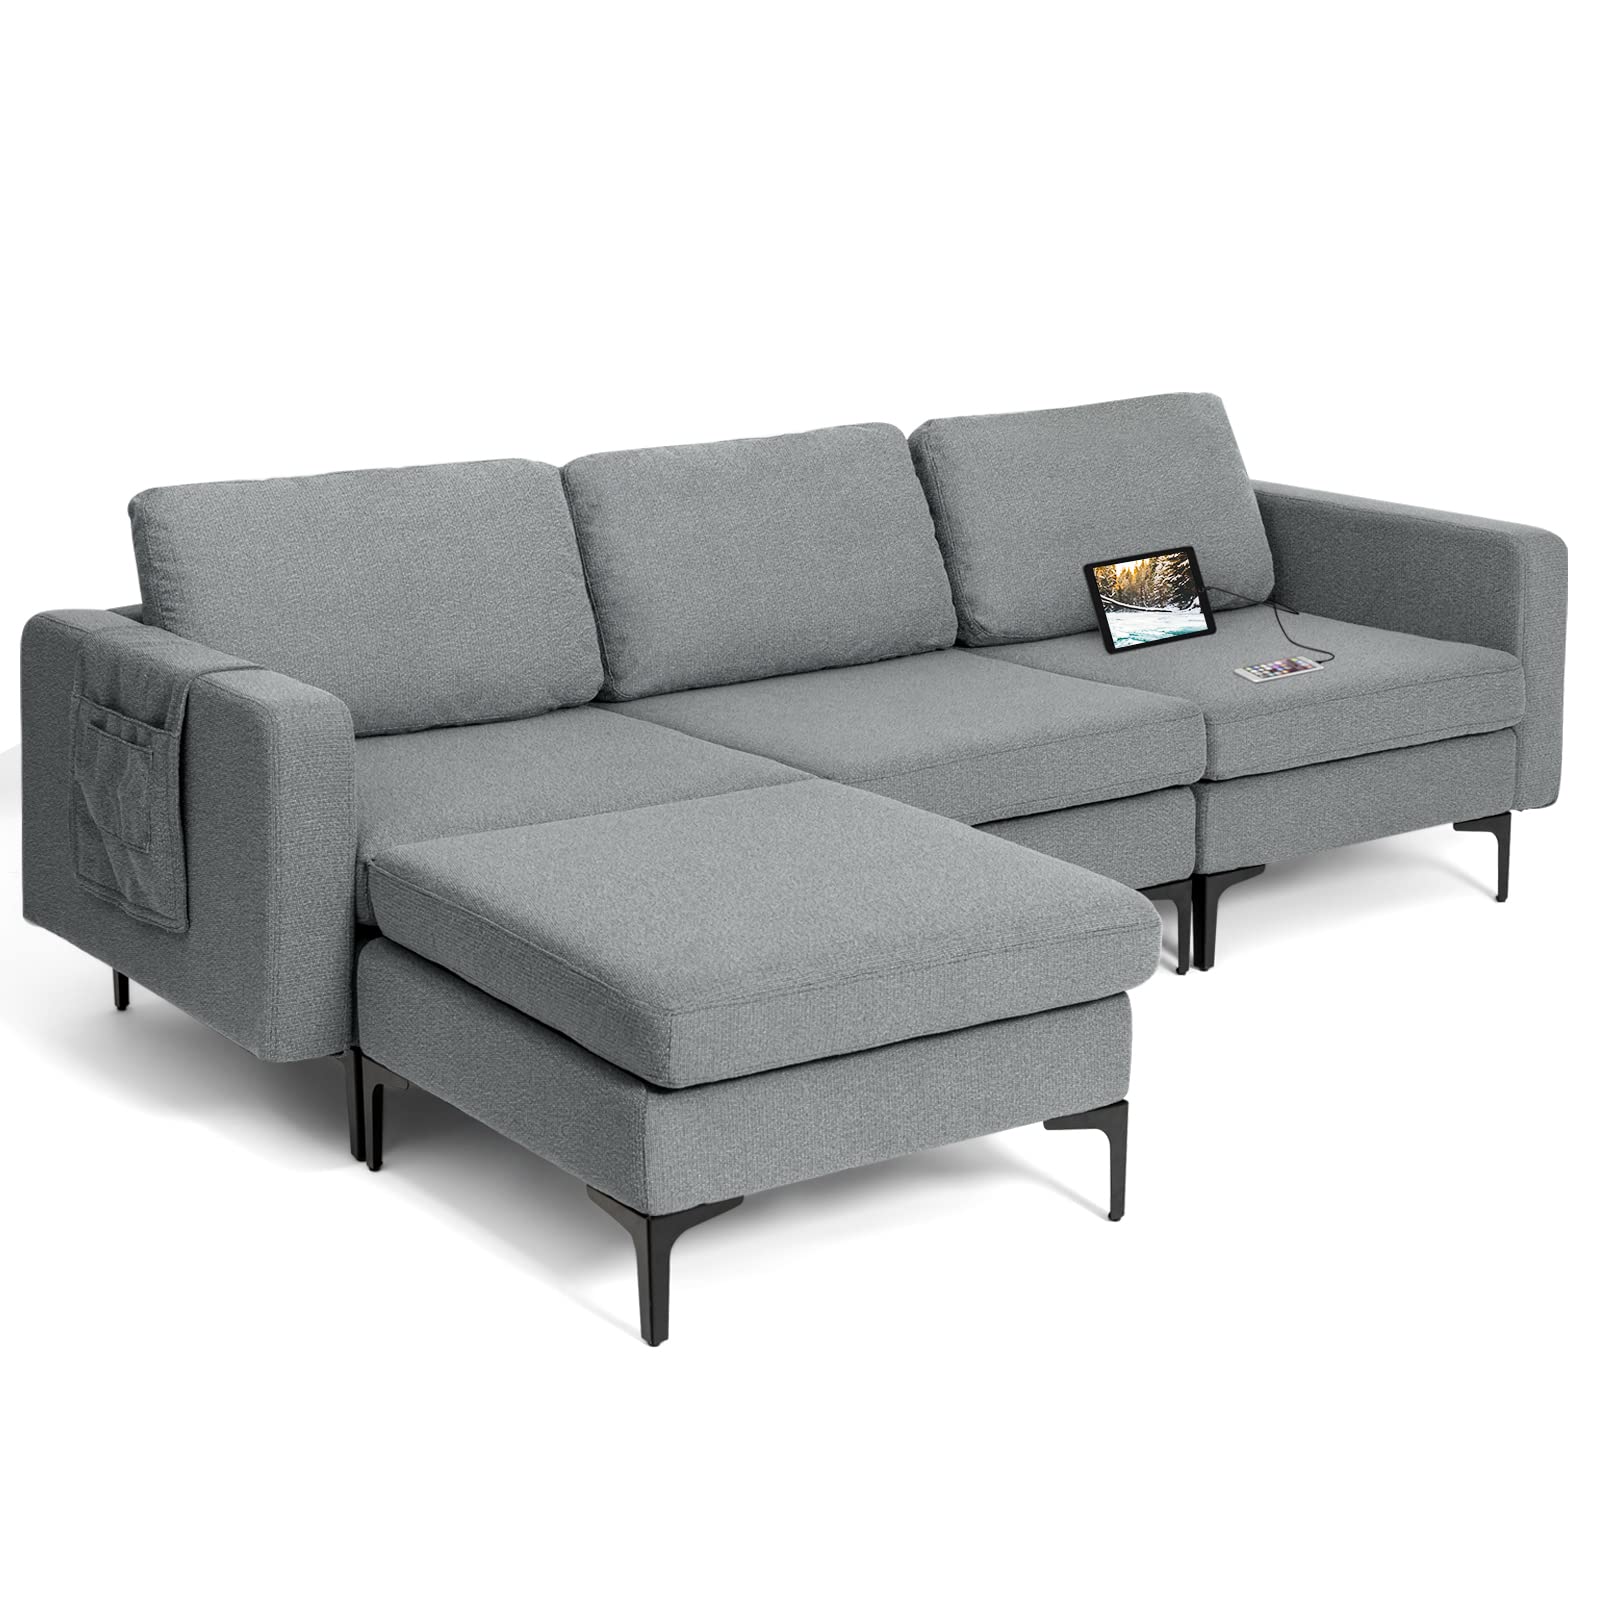 Giantex 94.5" L Convertible Sofa Couch, 3 Seat Sectional Sleeper with USB Ports & Socket